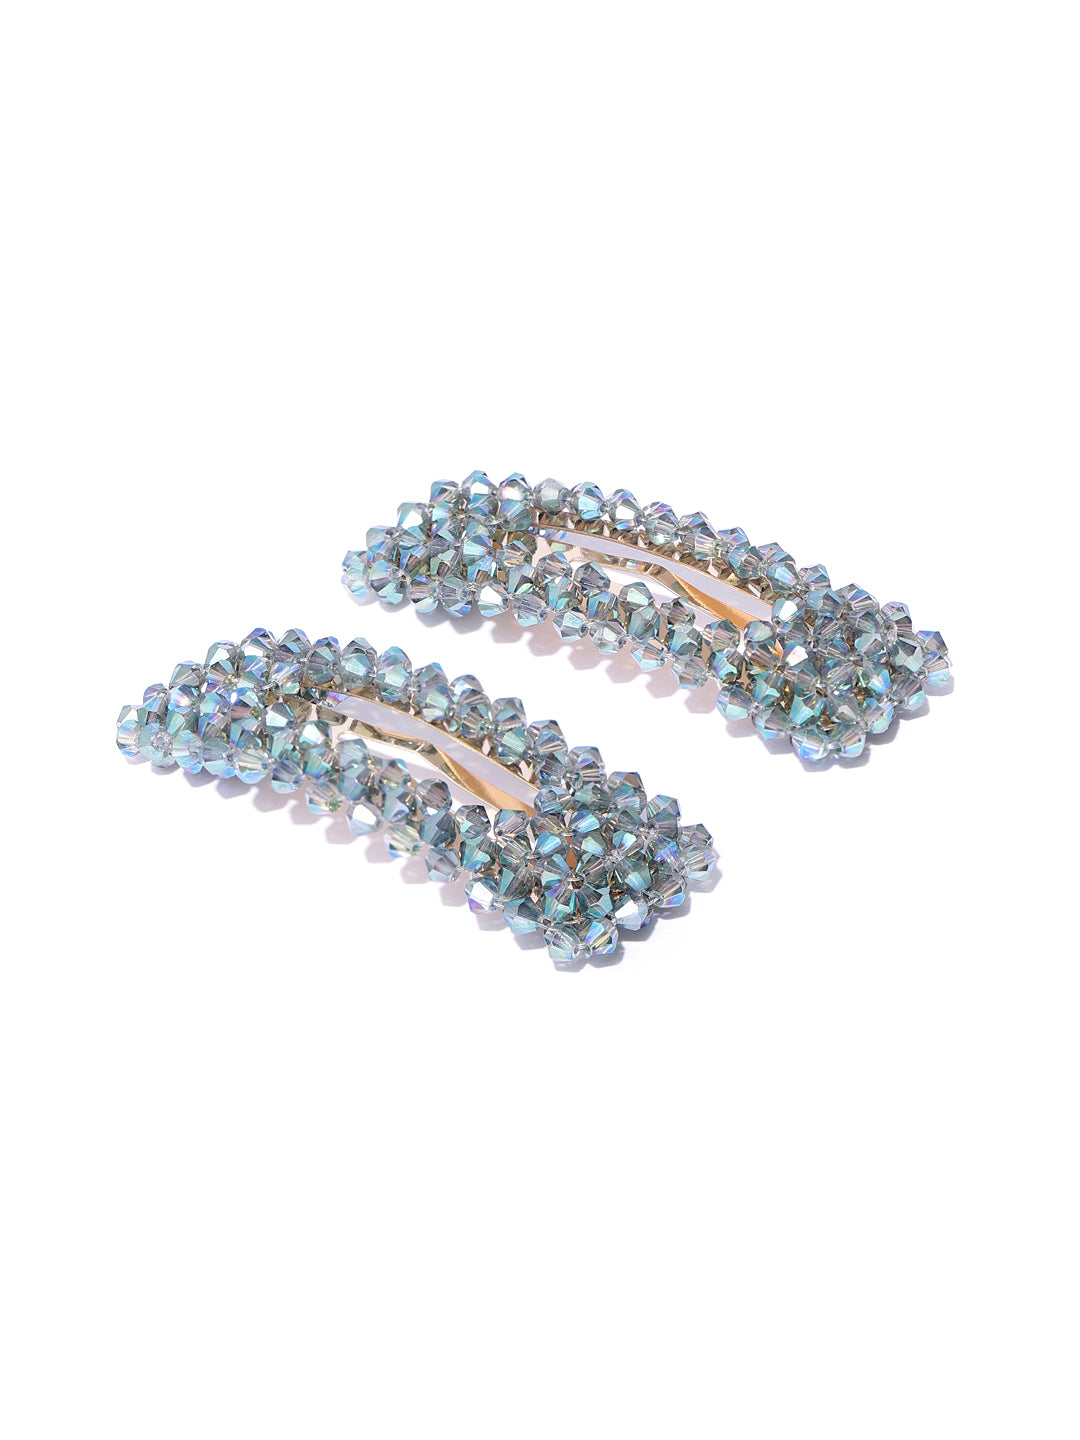 Blueberry set of 2 multi crystal beads detailing hair pins